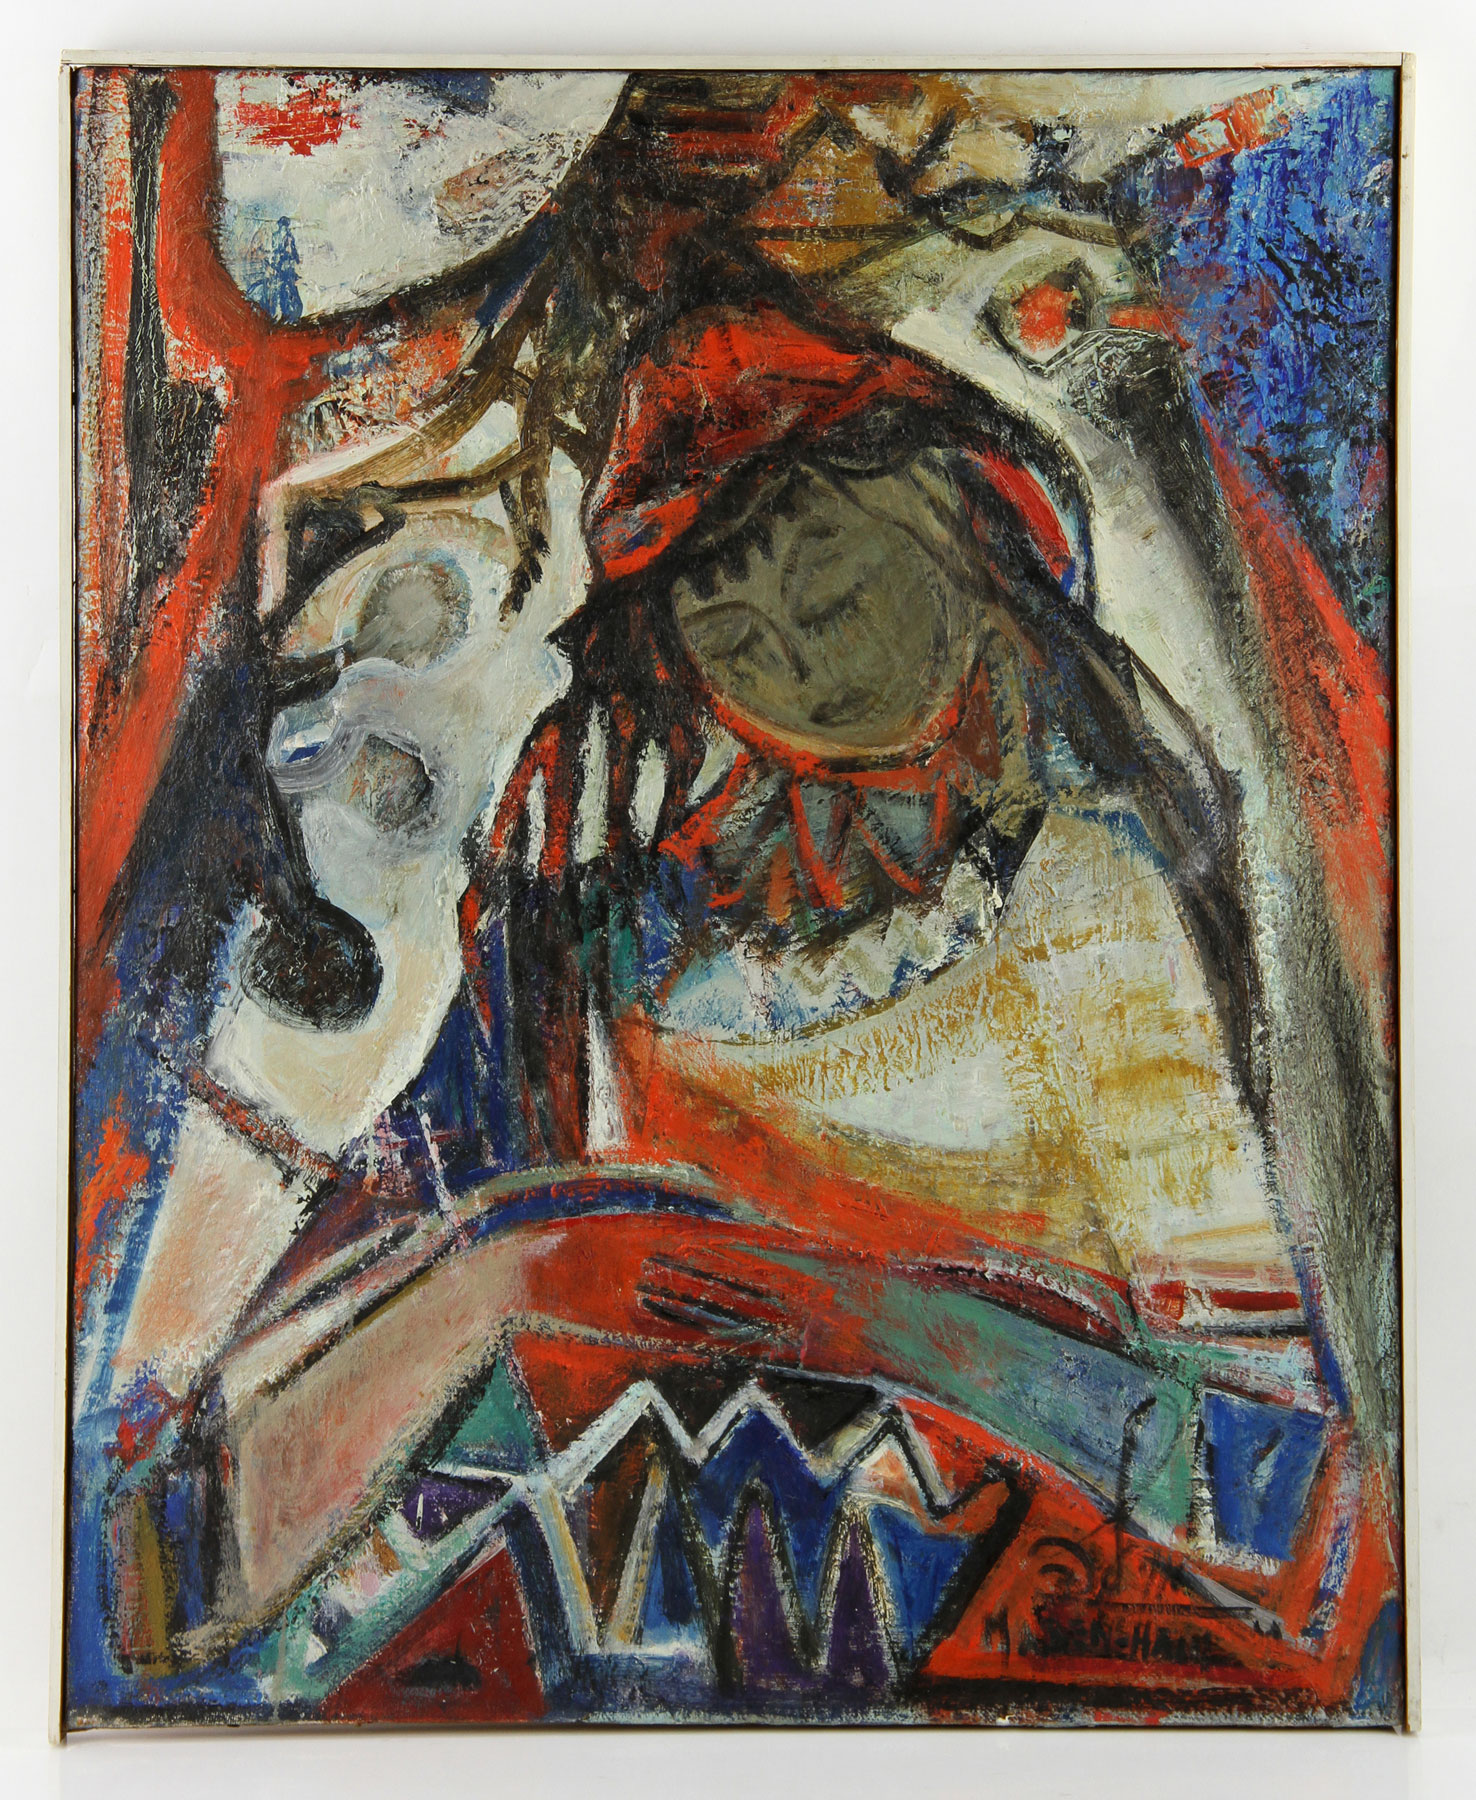 Ben-Chaim, Seated Woman, Oil on Canvas